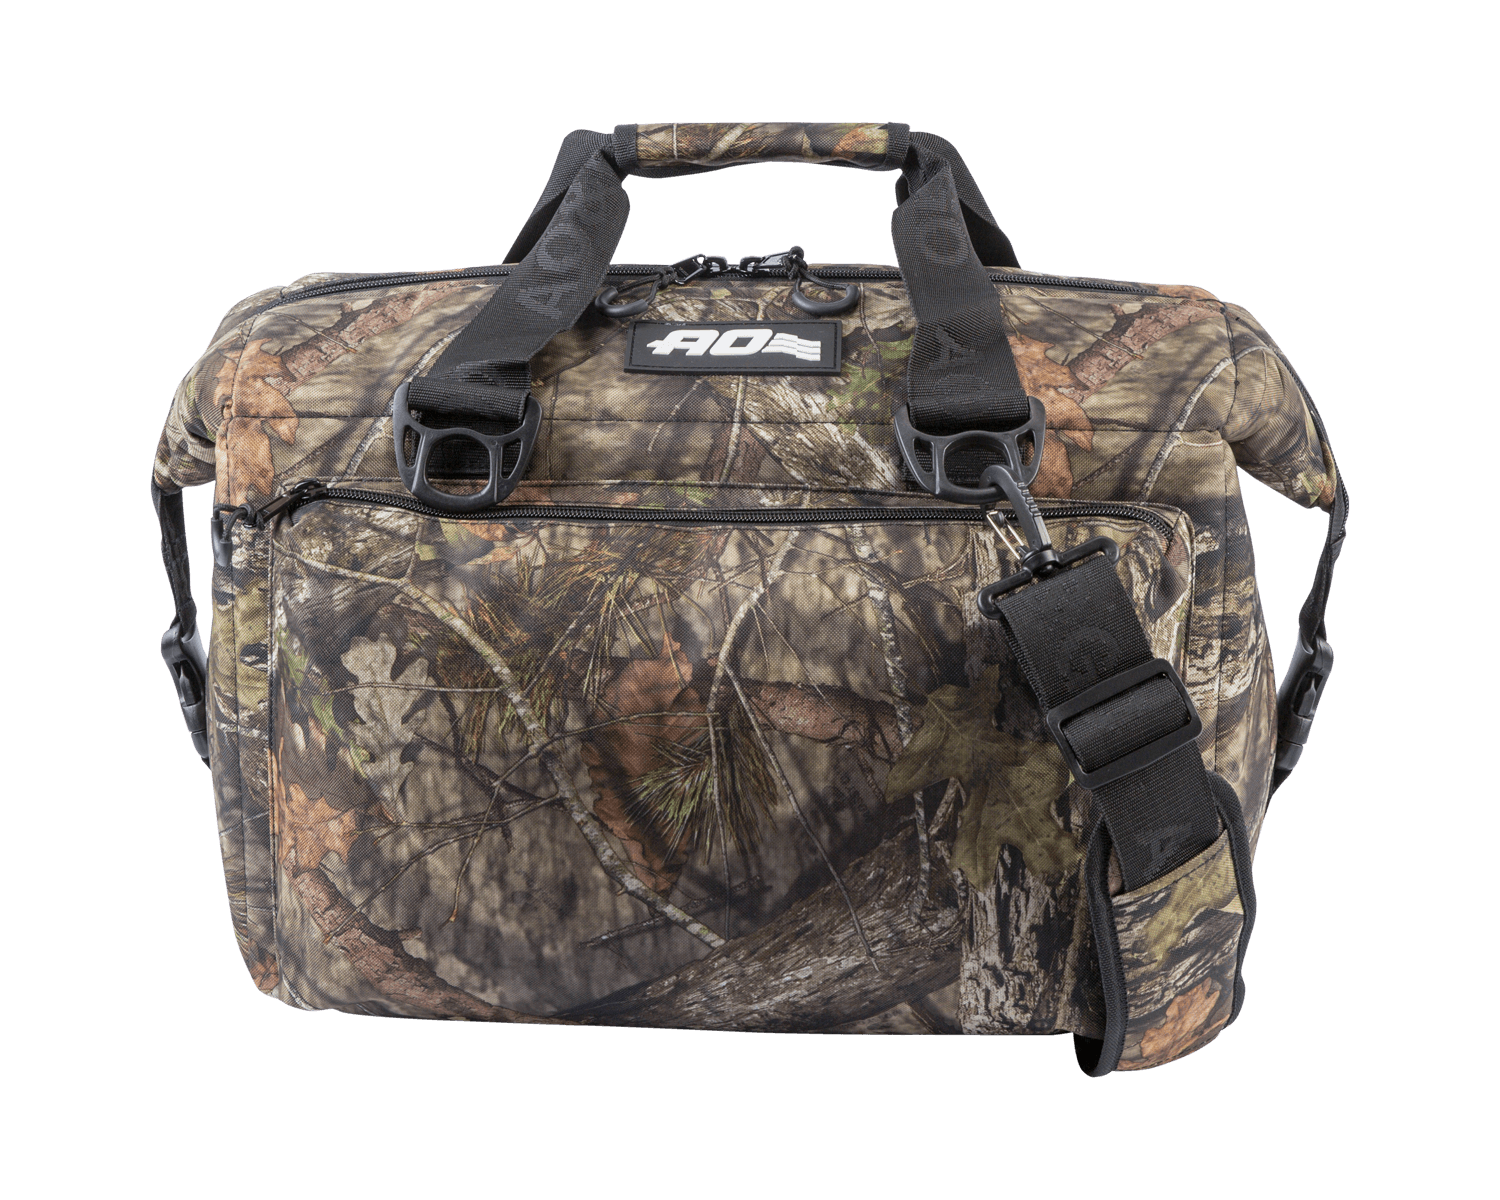 Mossy Oak® Collab Coolers, Coolers and Ice Chests